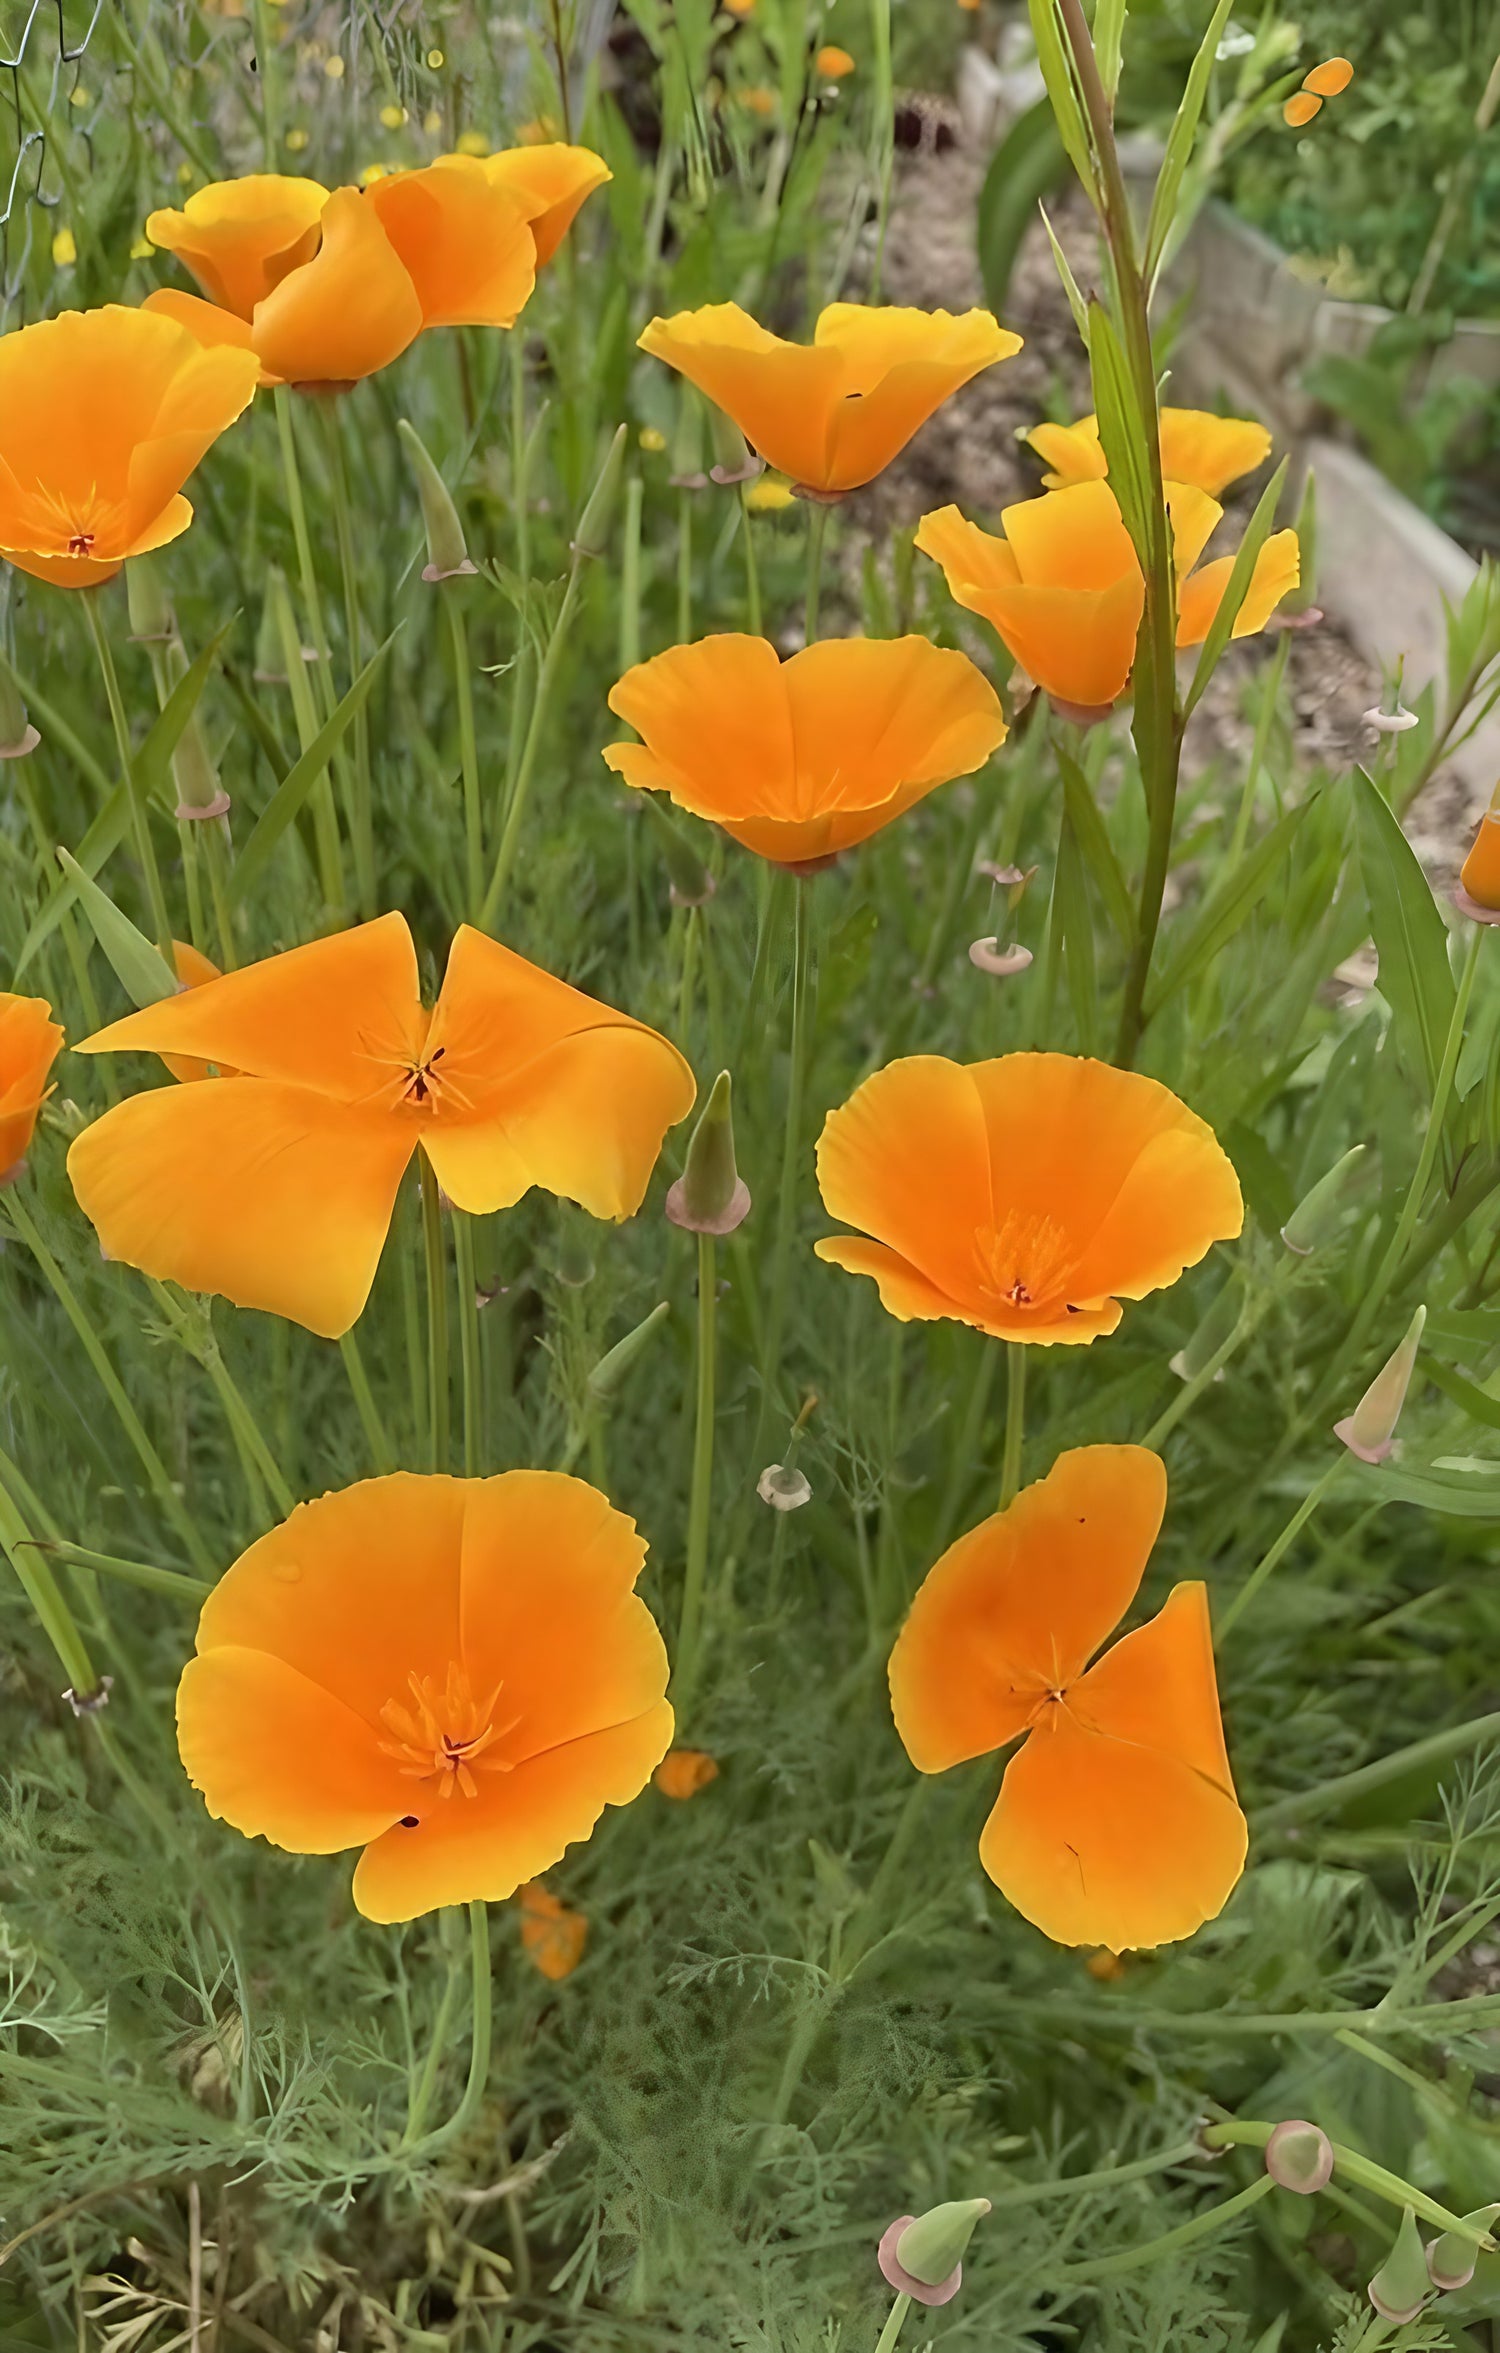 Close-up of Golden West California poppy flowers in natural sunlight